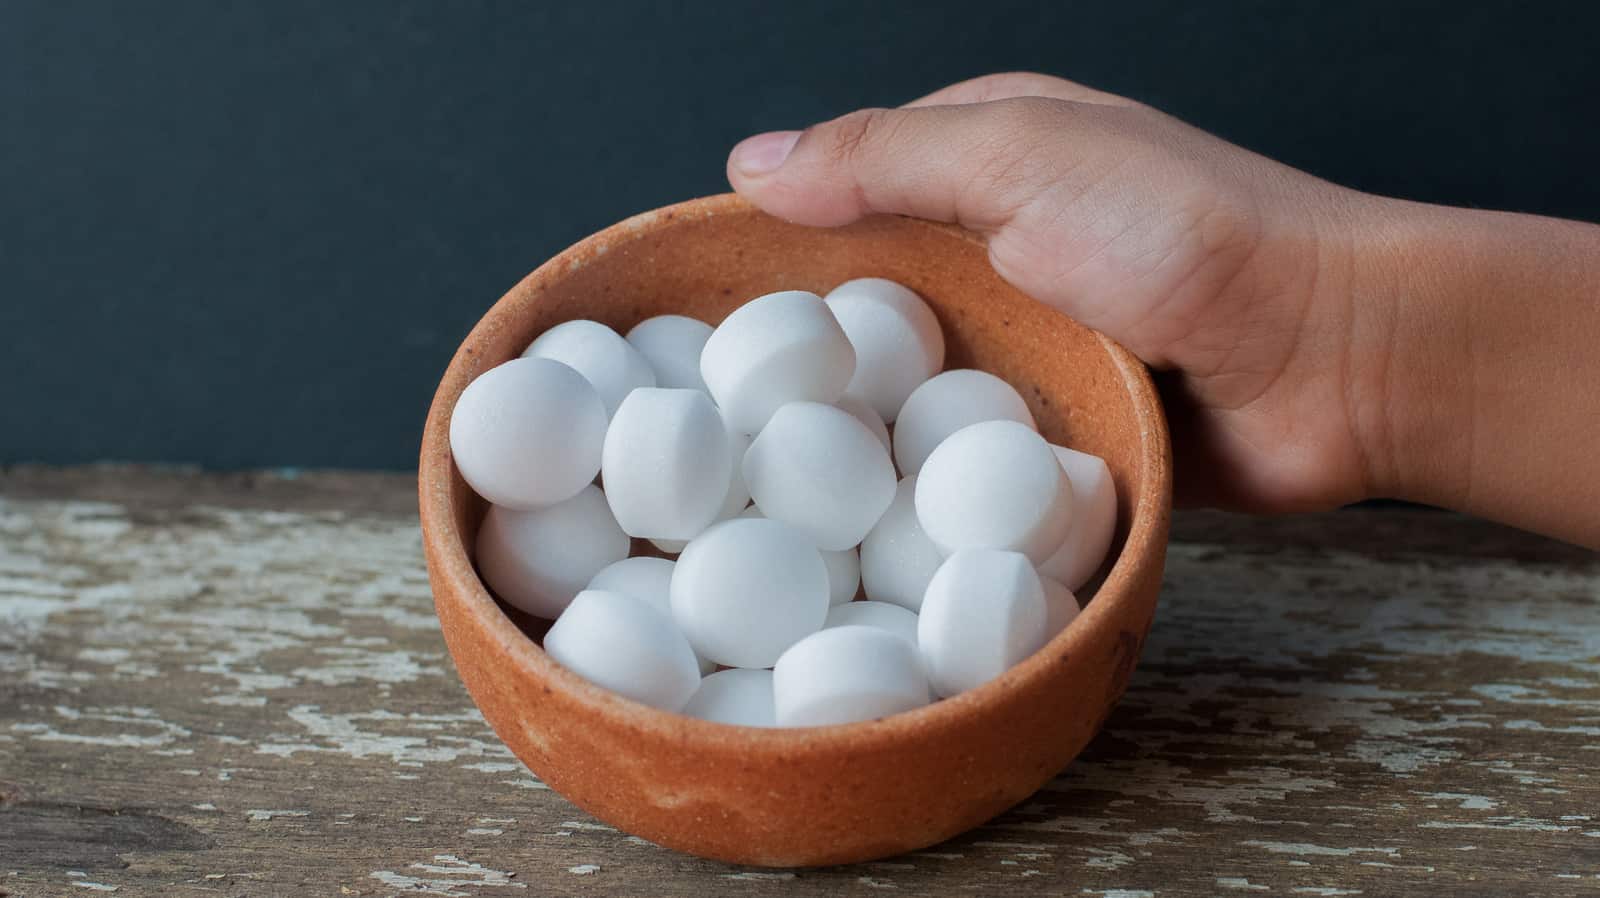 How to Use Mothballs in The Kitchen? [Steps Explained]